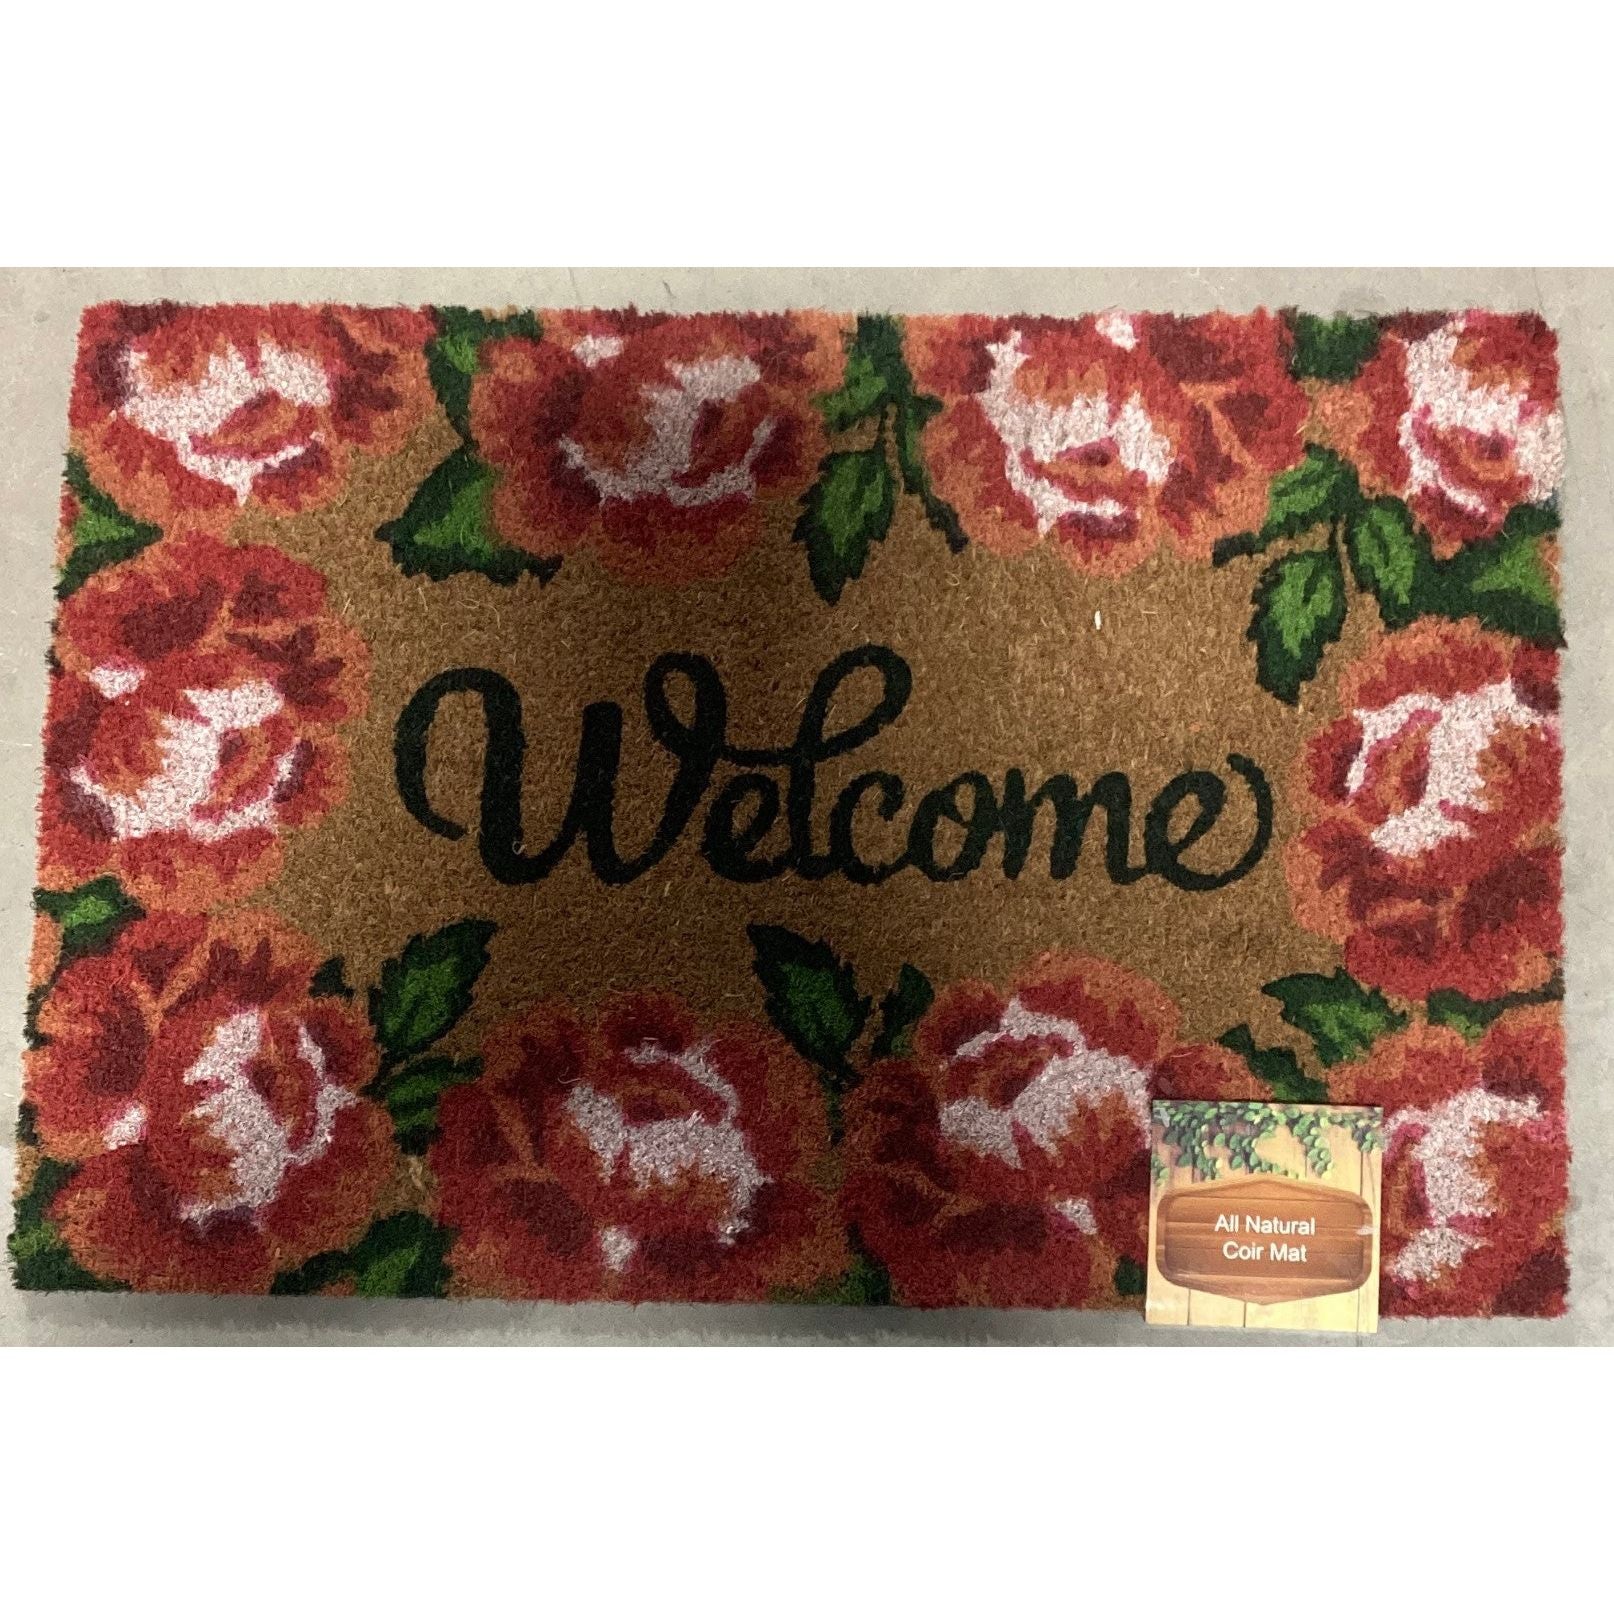 Welcome mat that reads "Welcome" surrounded by red poppys